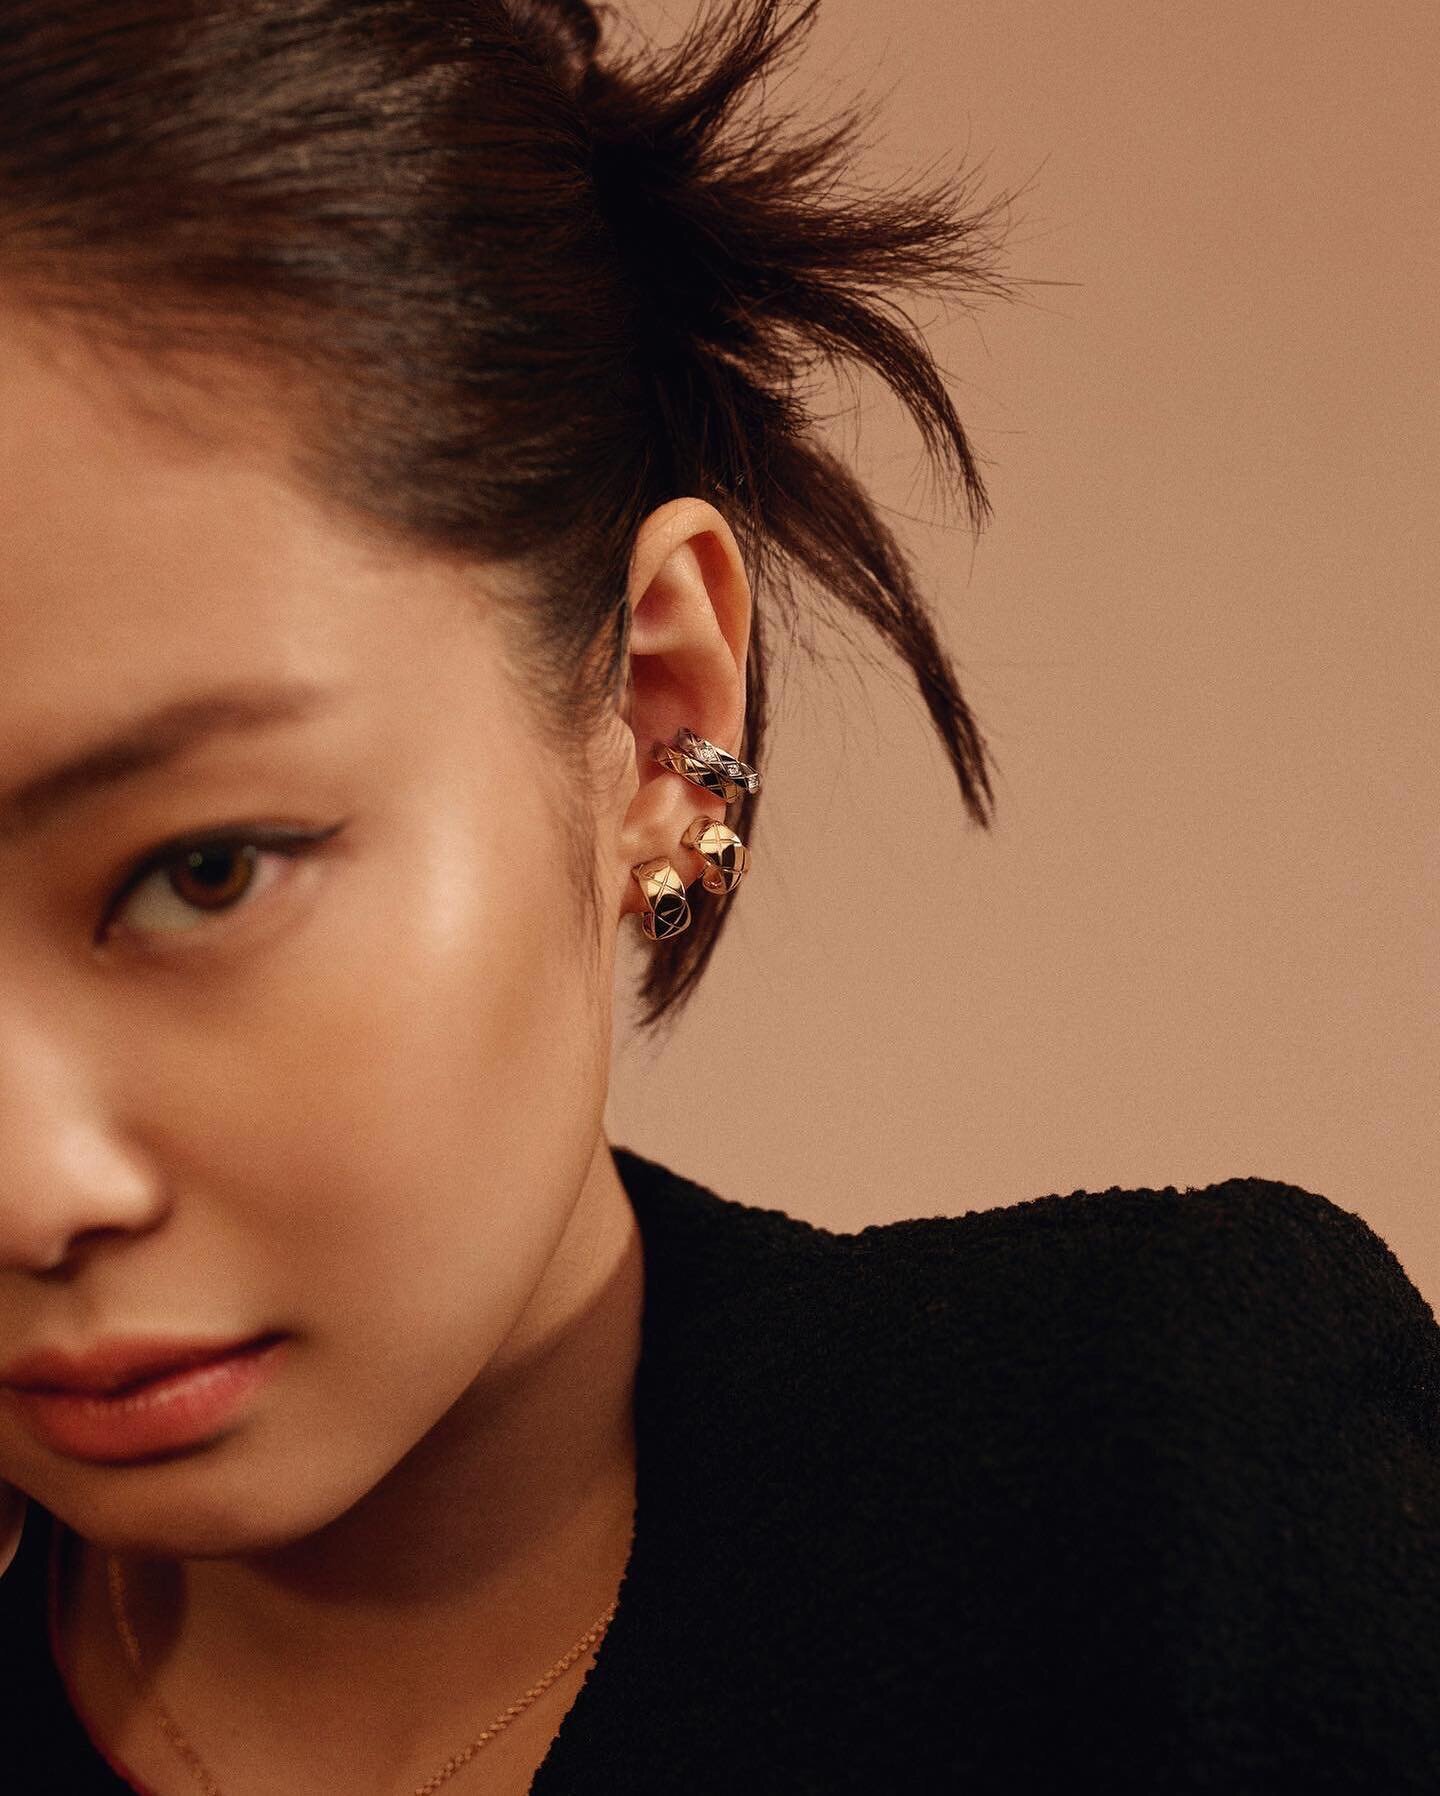 New CHANEL Coco Crush Campaign Features BLACKPINK Jennie  TheBeauLife